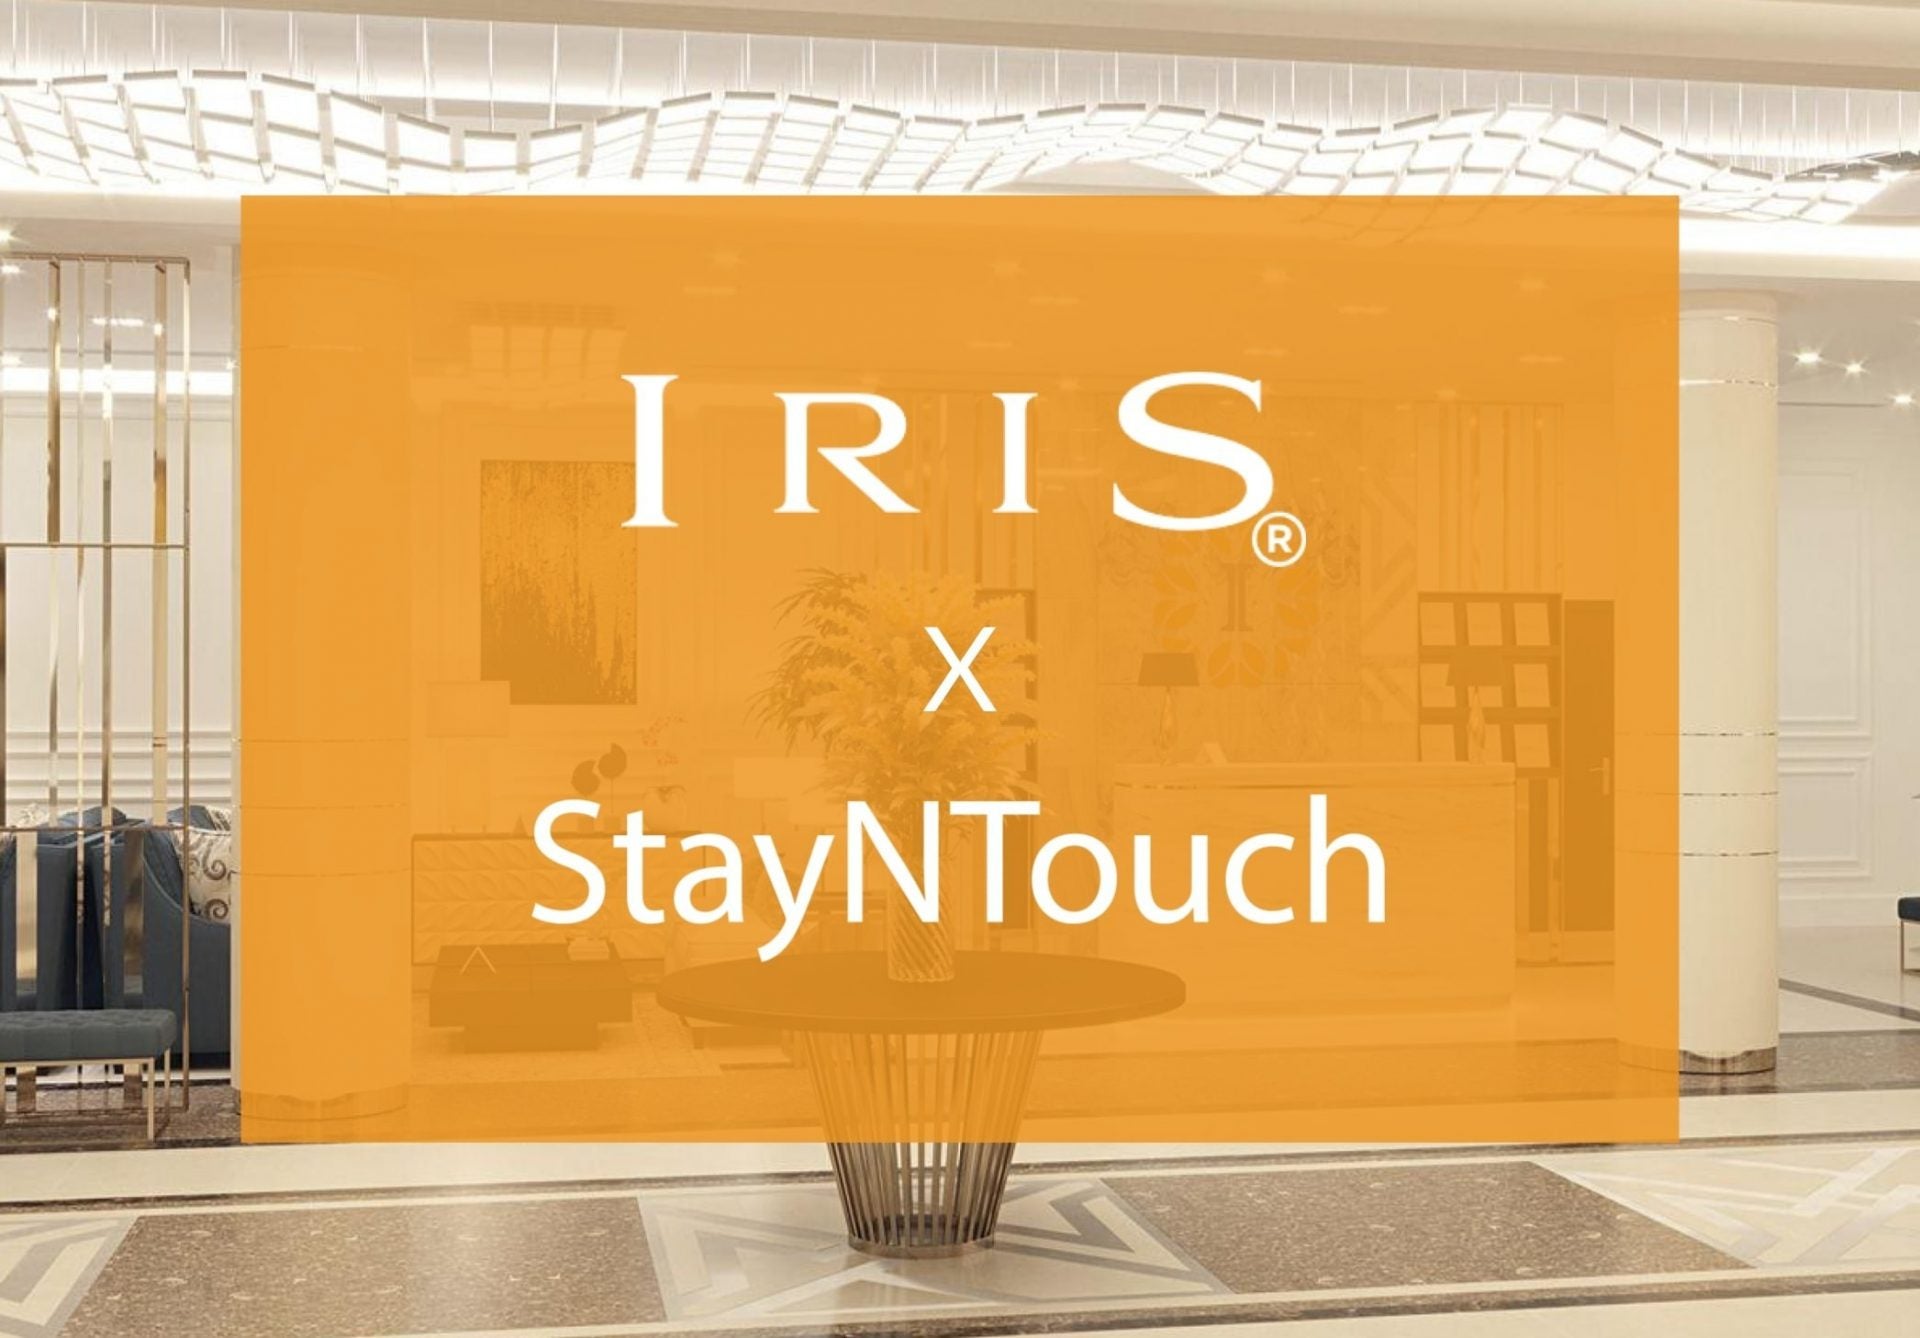 IRIS Hotels selects StayNTouch for boutique hotels across Saudi Arabia